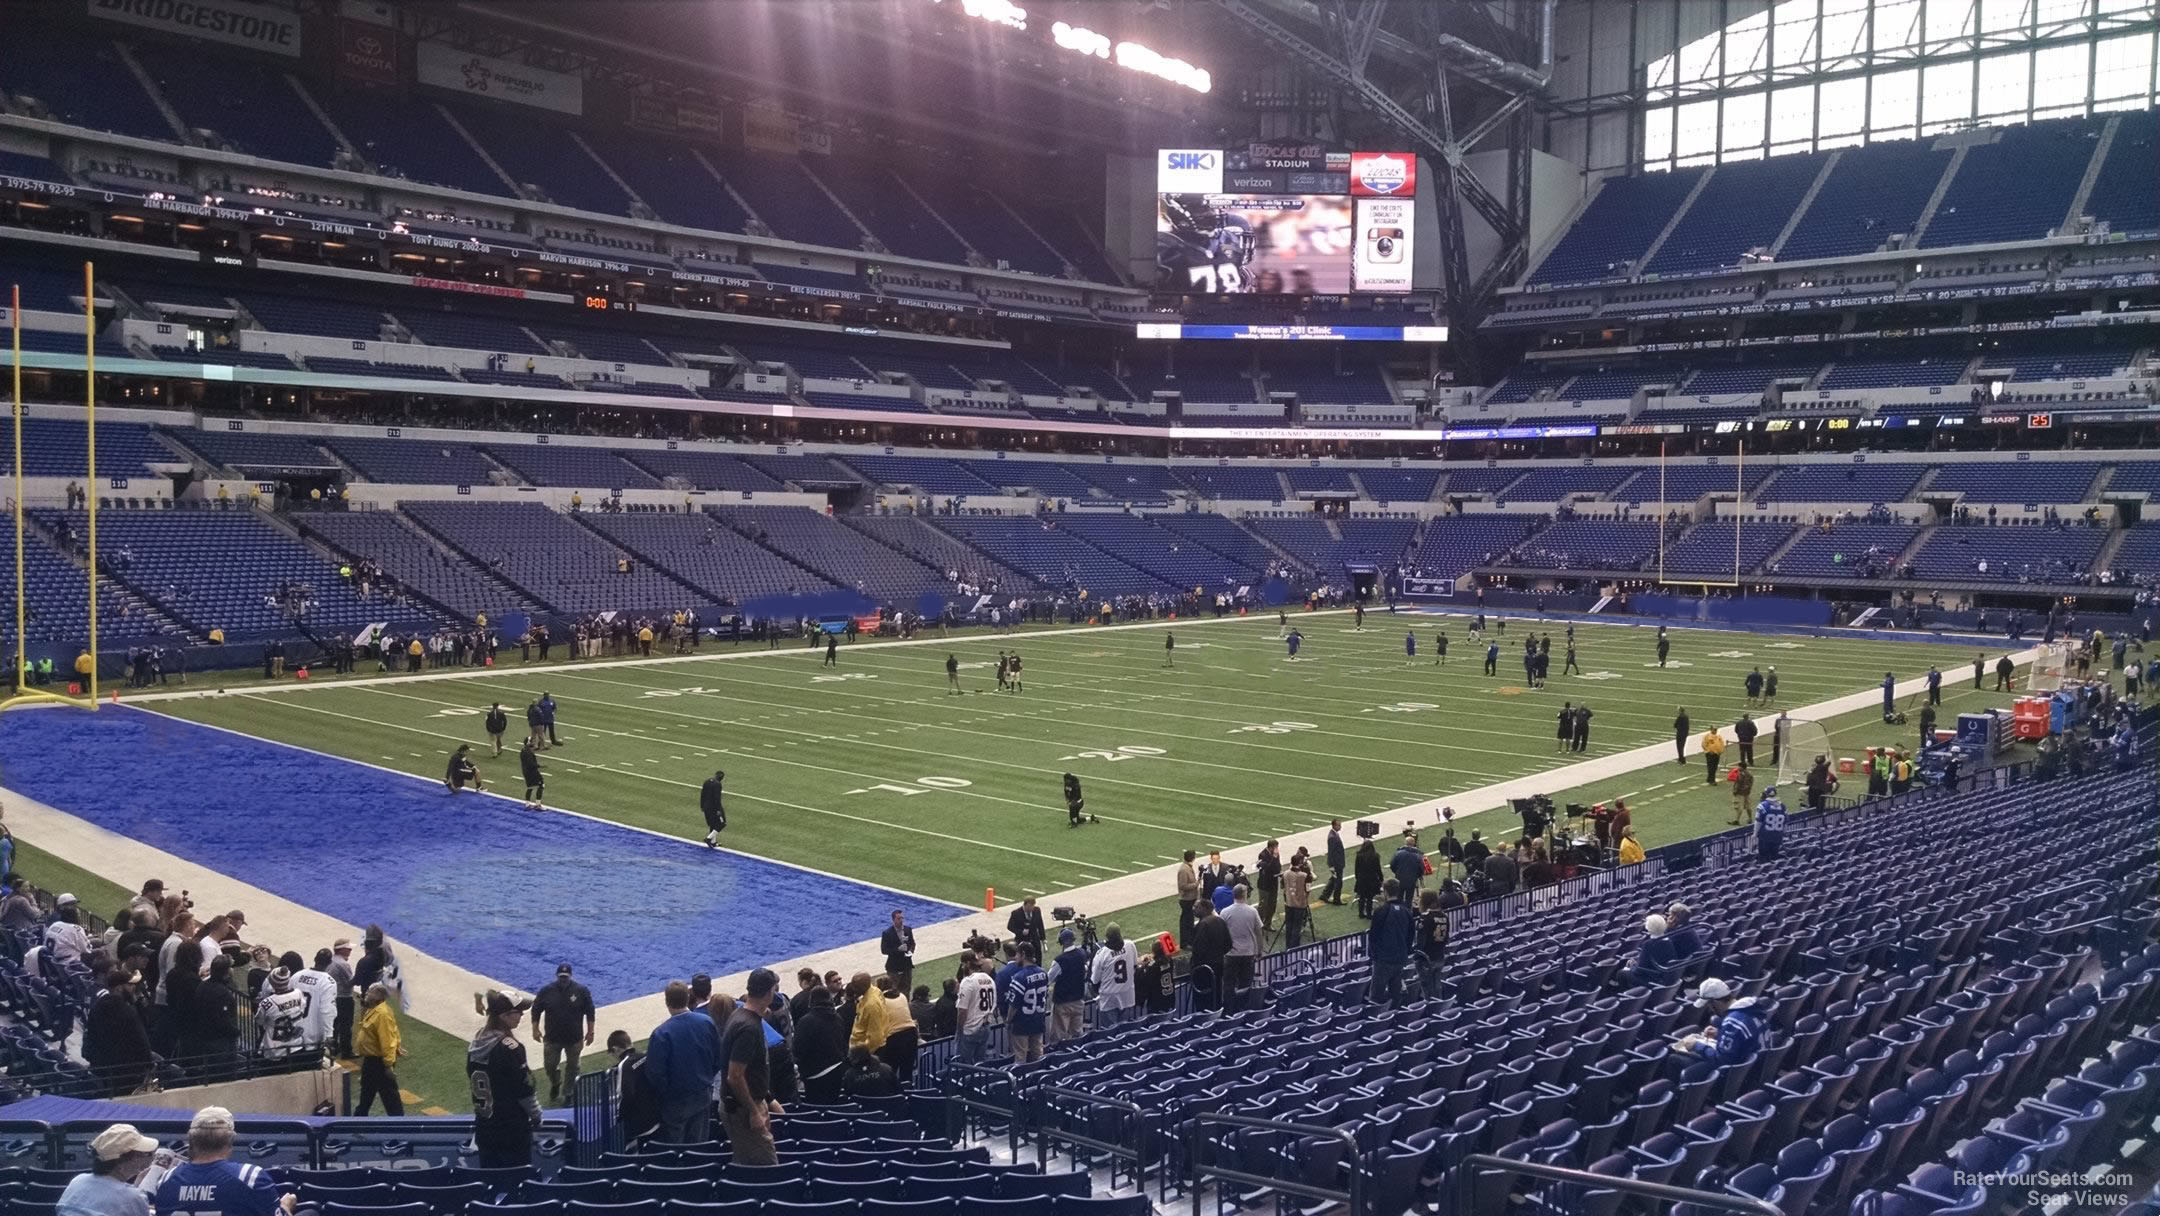 section 148, row 22 seat view  for football - lucas oil stadium